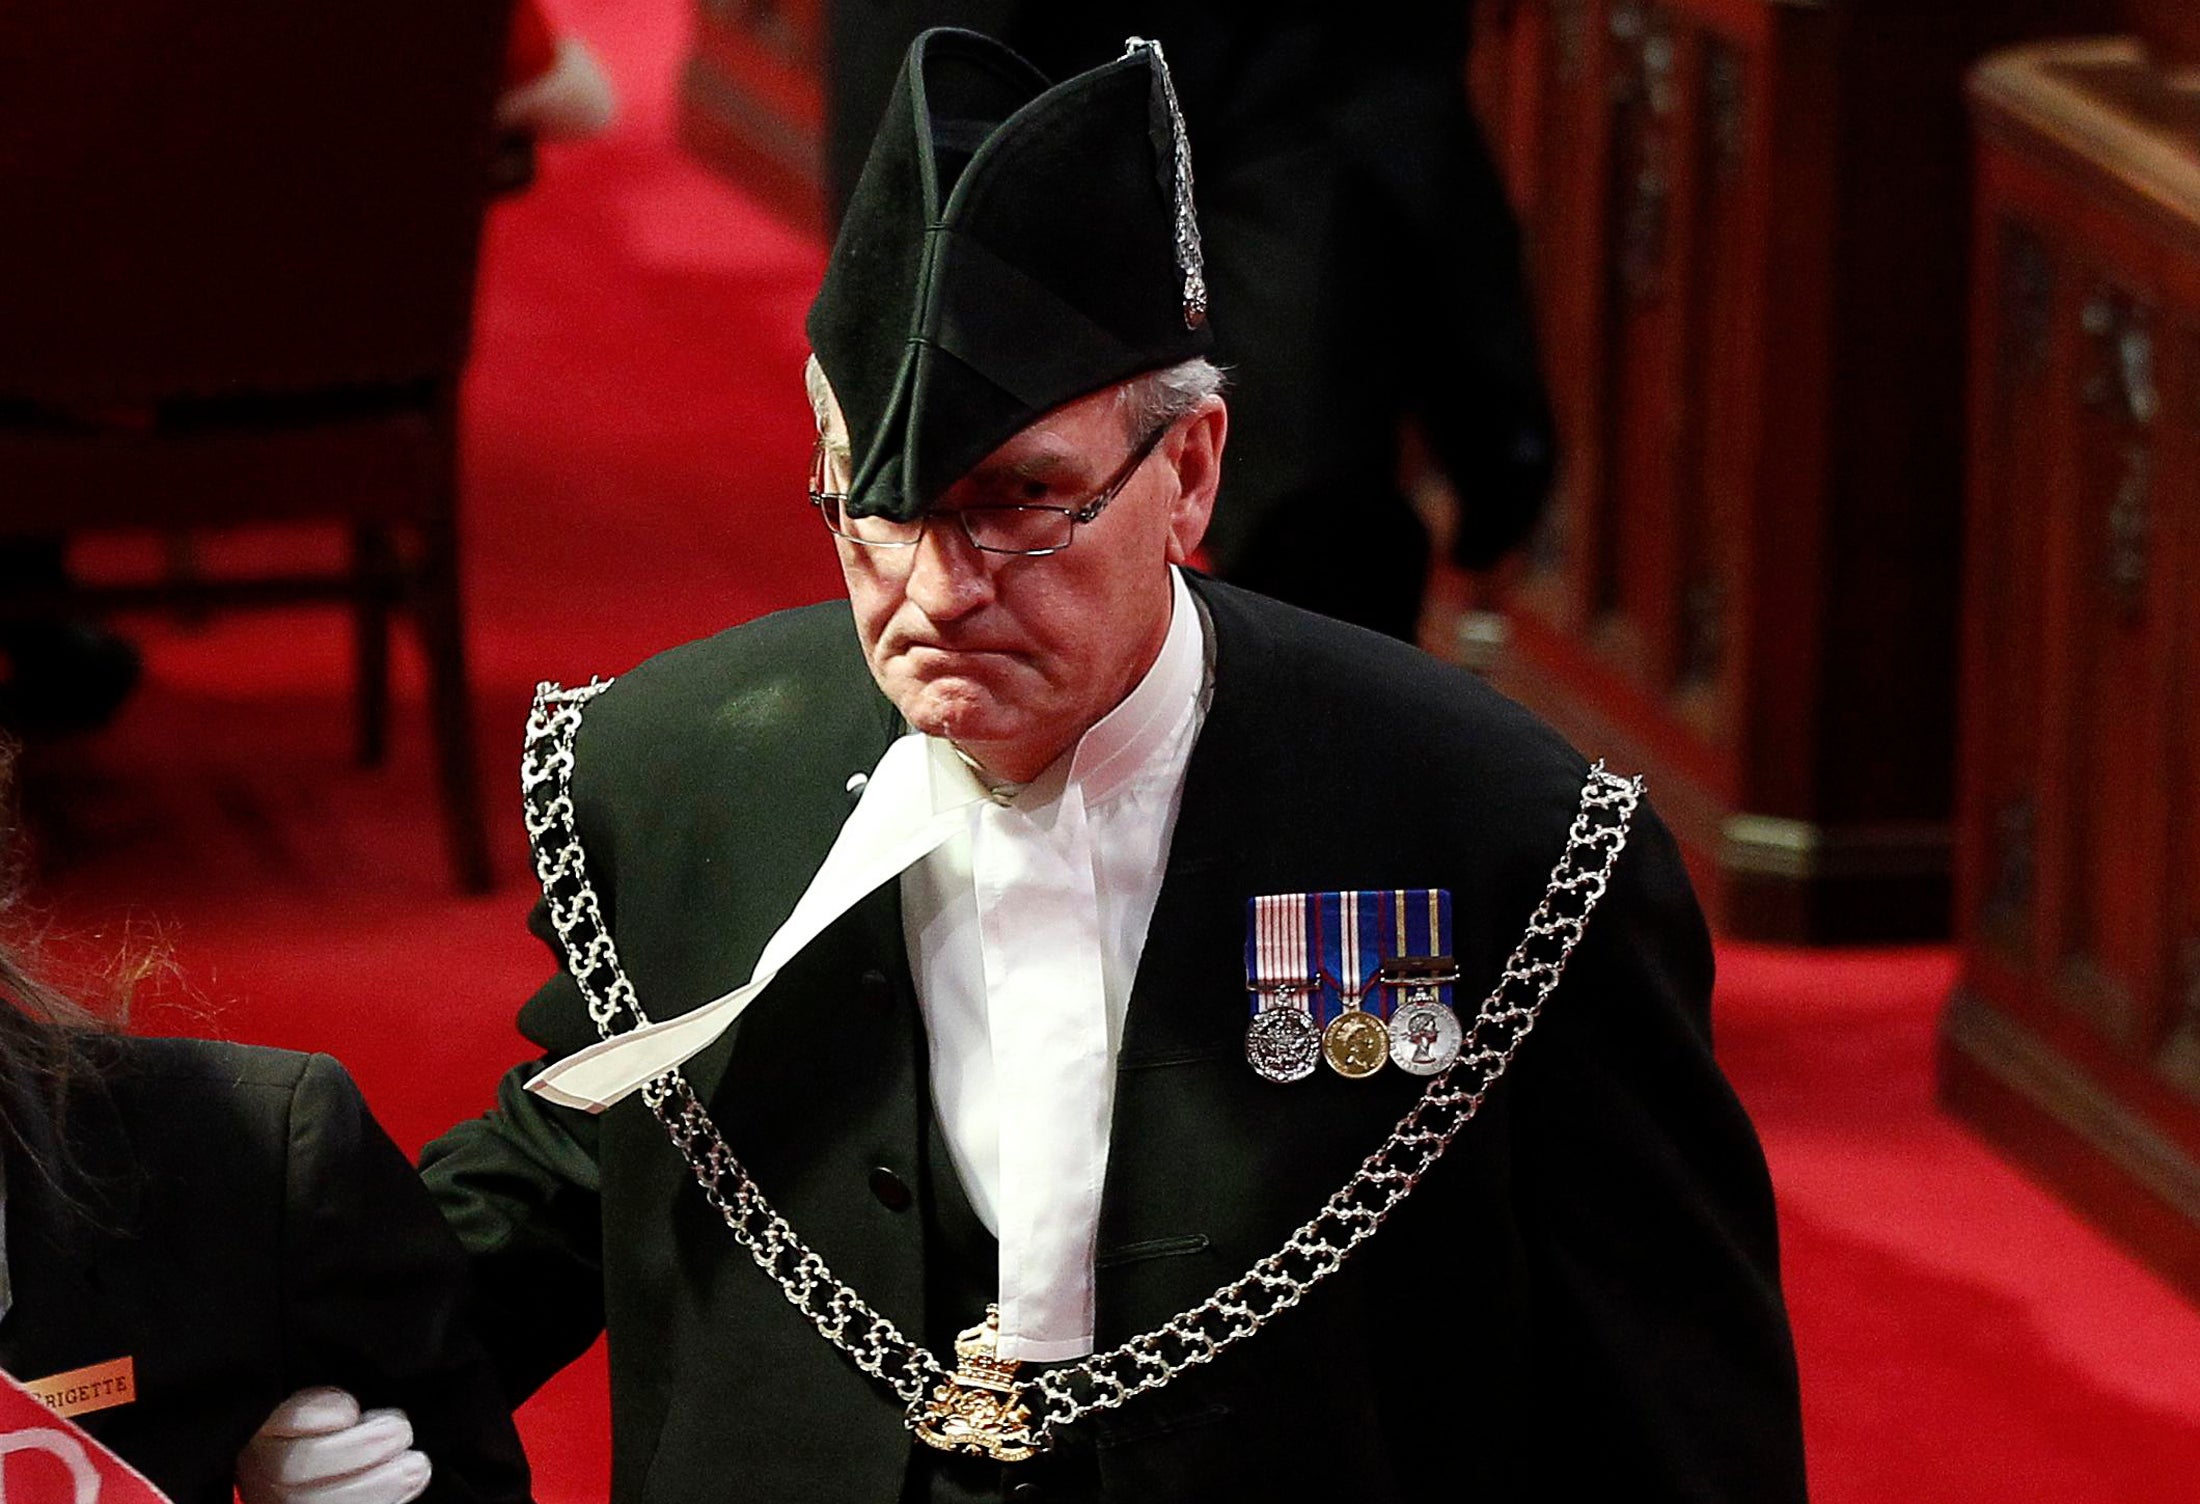 Sergeant-at-Arms Kevin Vickers is understood to have shot the gunman in Parliament